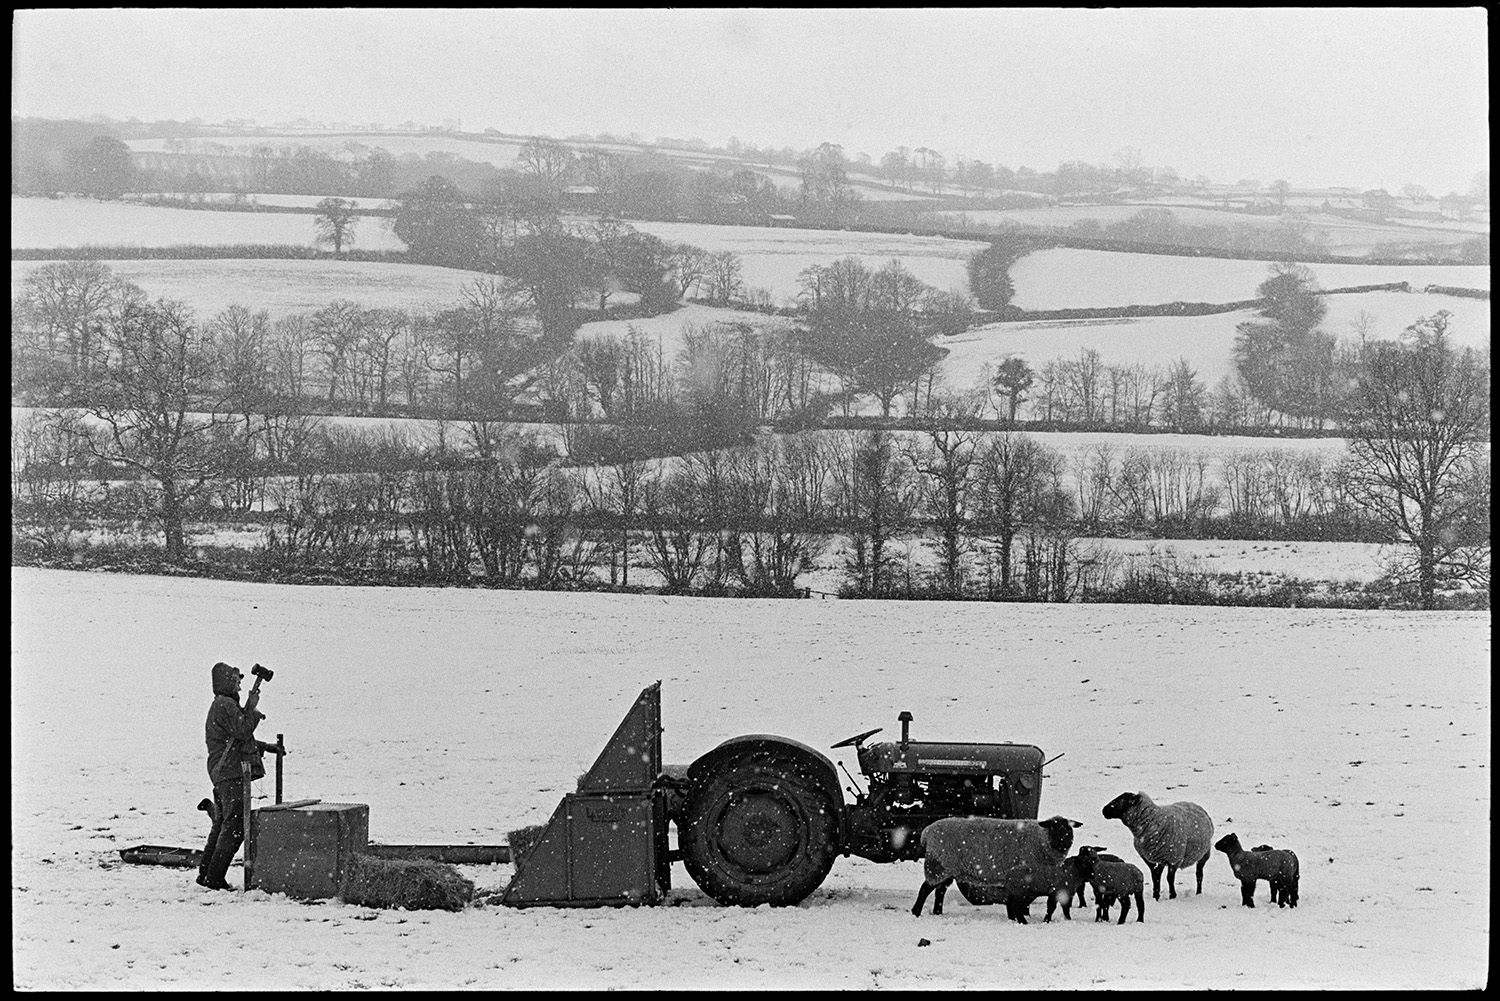 Farmer taking hay and water tank out to snowbound sheep. 
[Graham Ward taking hay bale and a water tank to sheep in a snow covered field at Parsonage, Iddesleigh using a tractor and link box. He is securing the water tank. A landscape of snow covered fields and trees is visible in the background.]